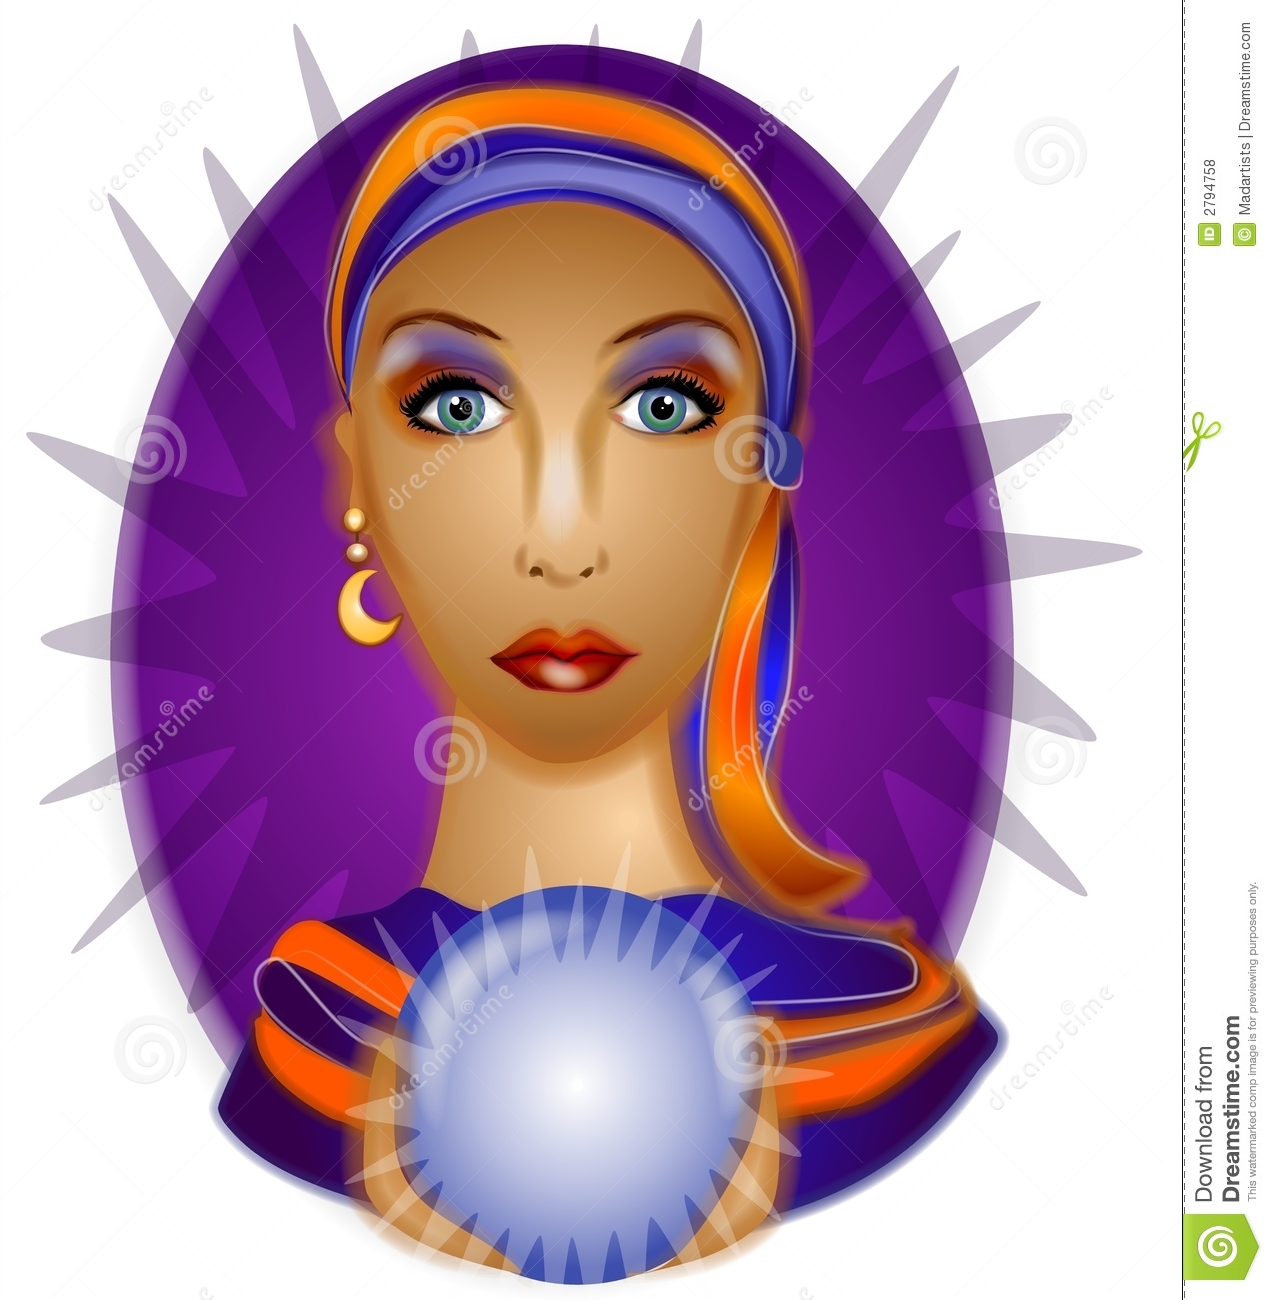 Fortune Teller Crystal Ball 2 Royalty Free Stock Photos   Image